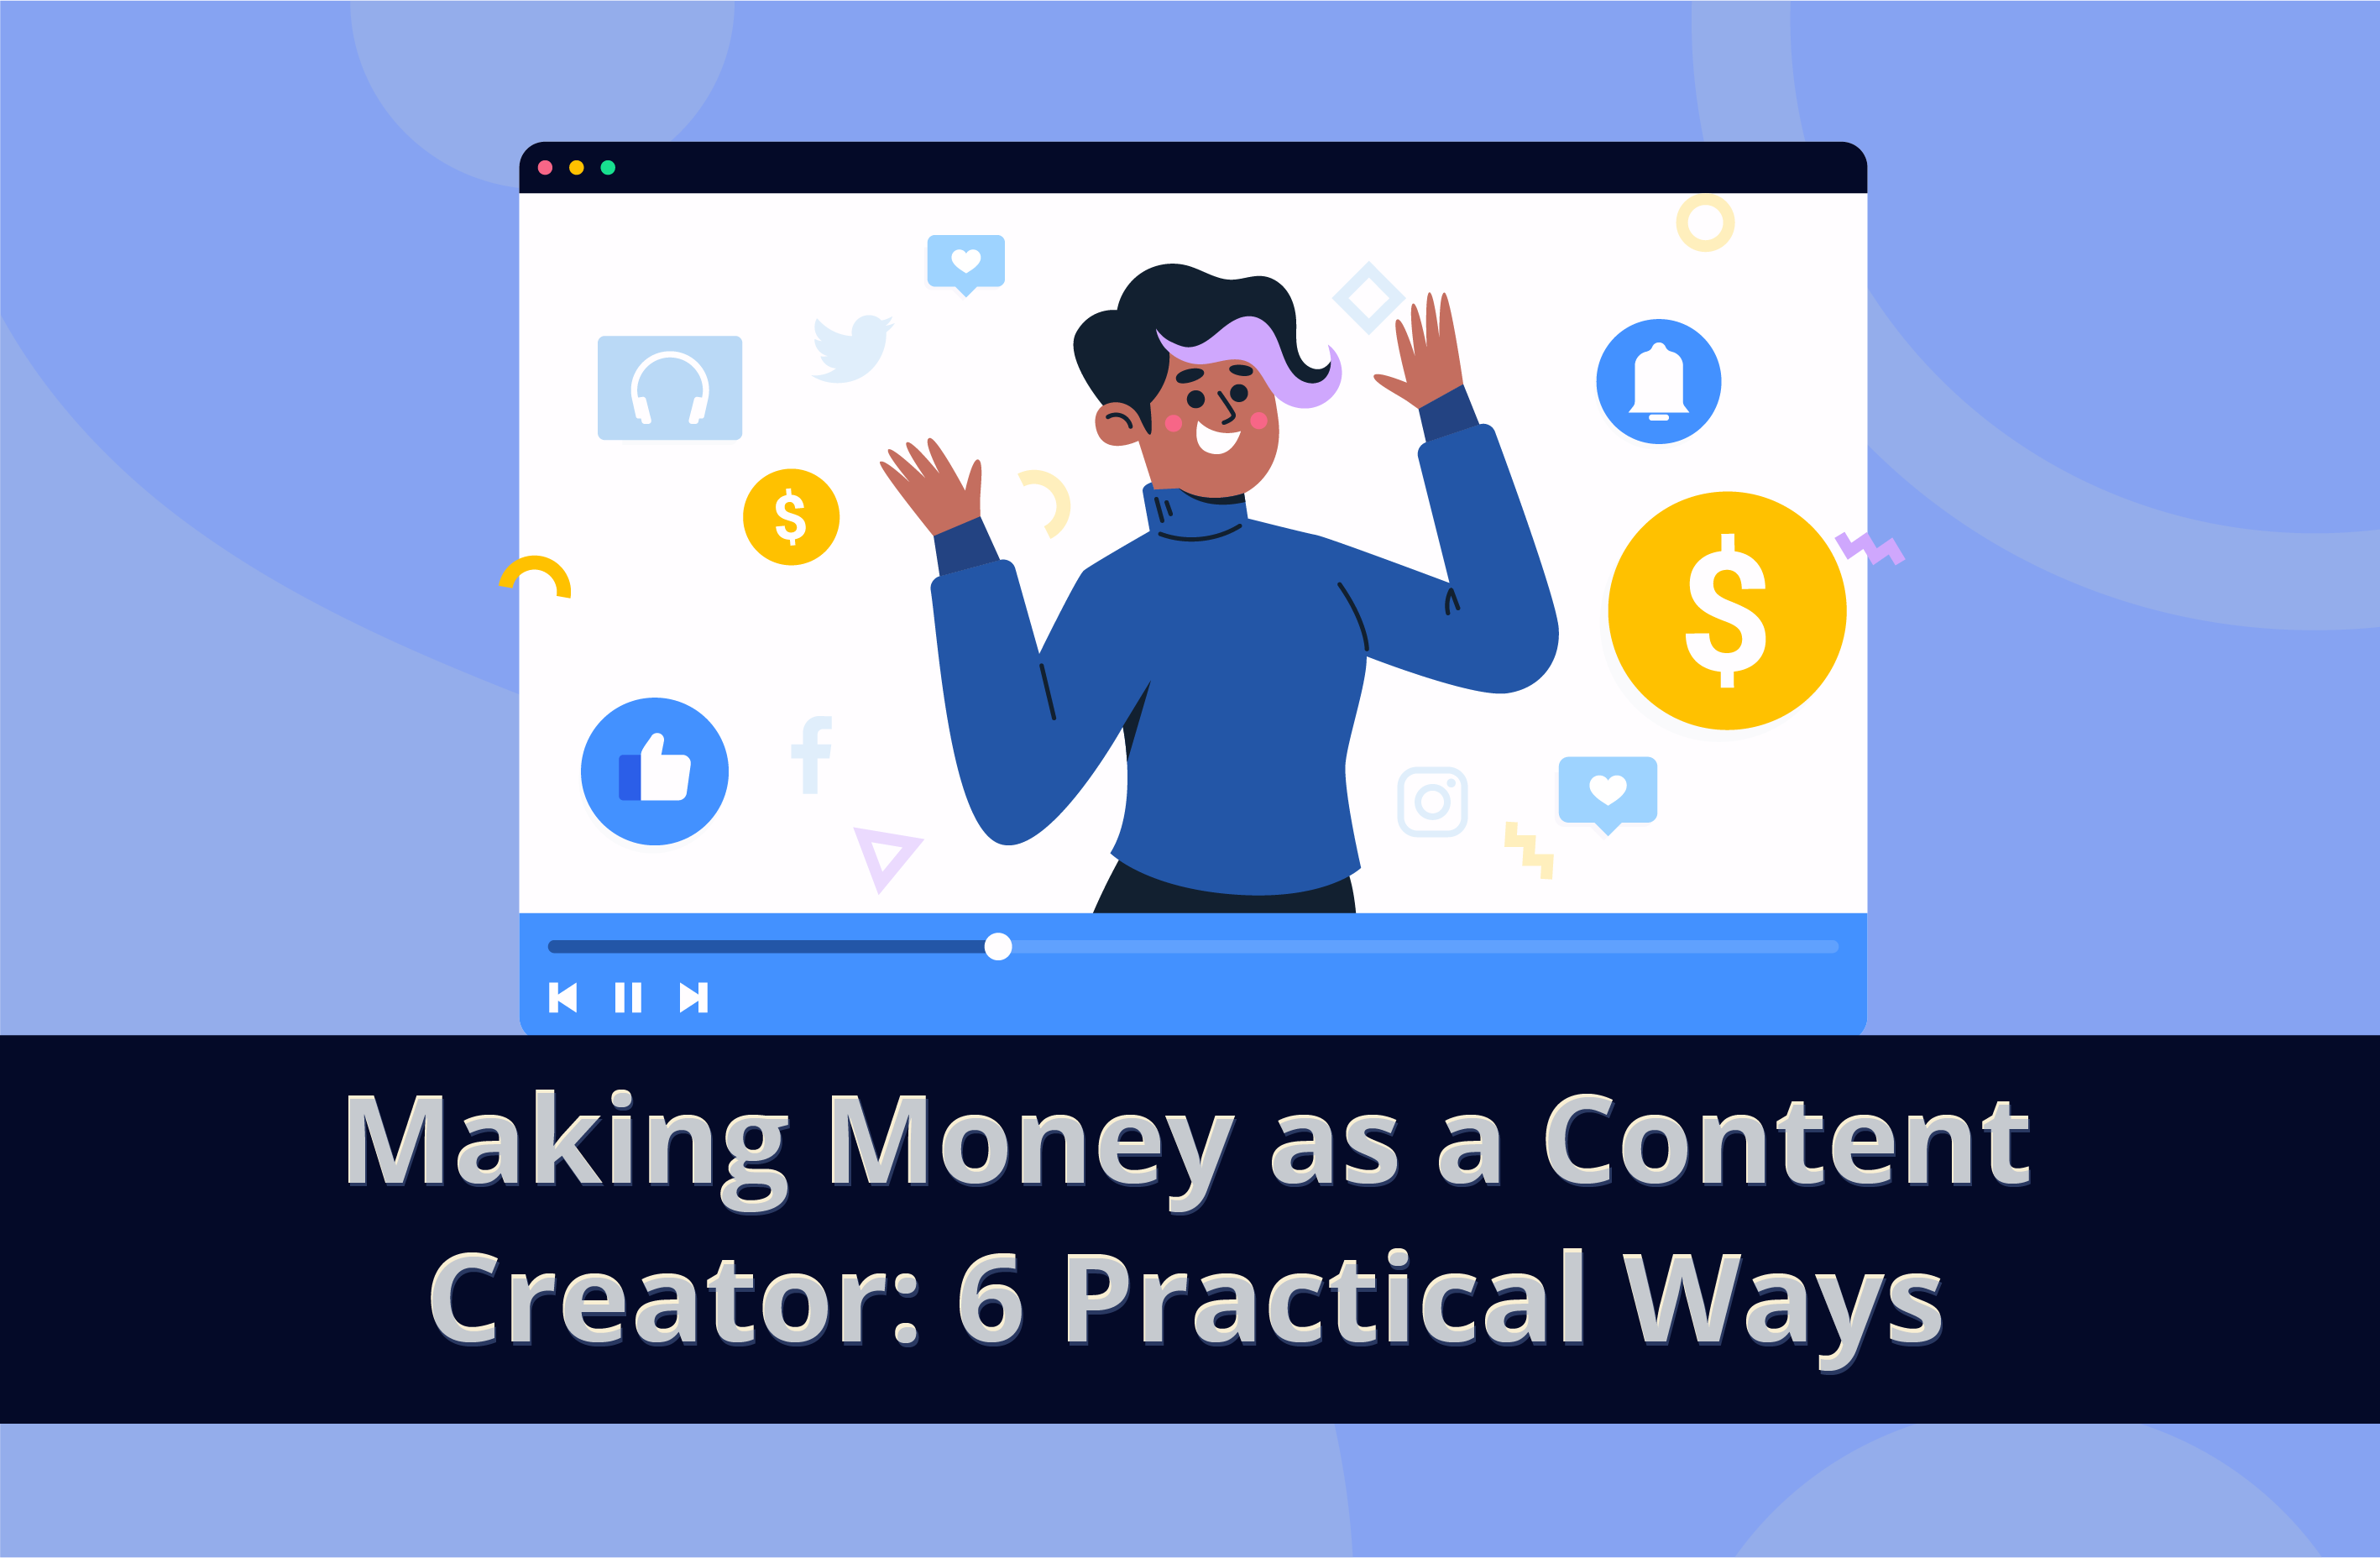 6 Practical Ways for Content Creators to Make (More) Money